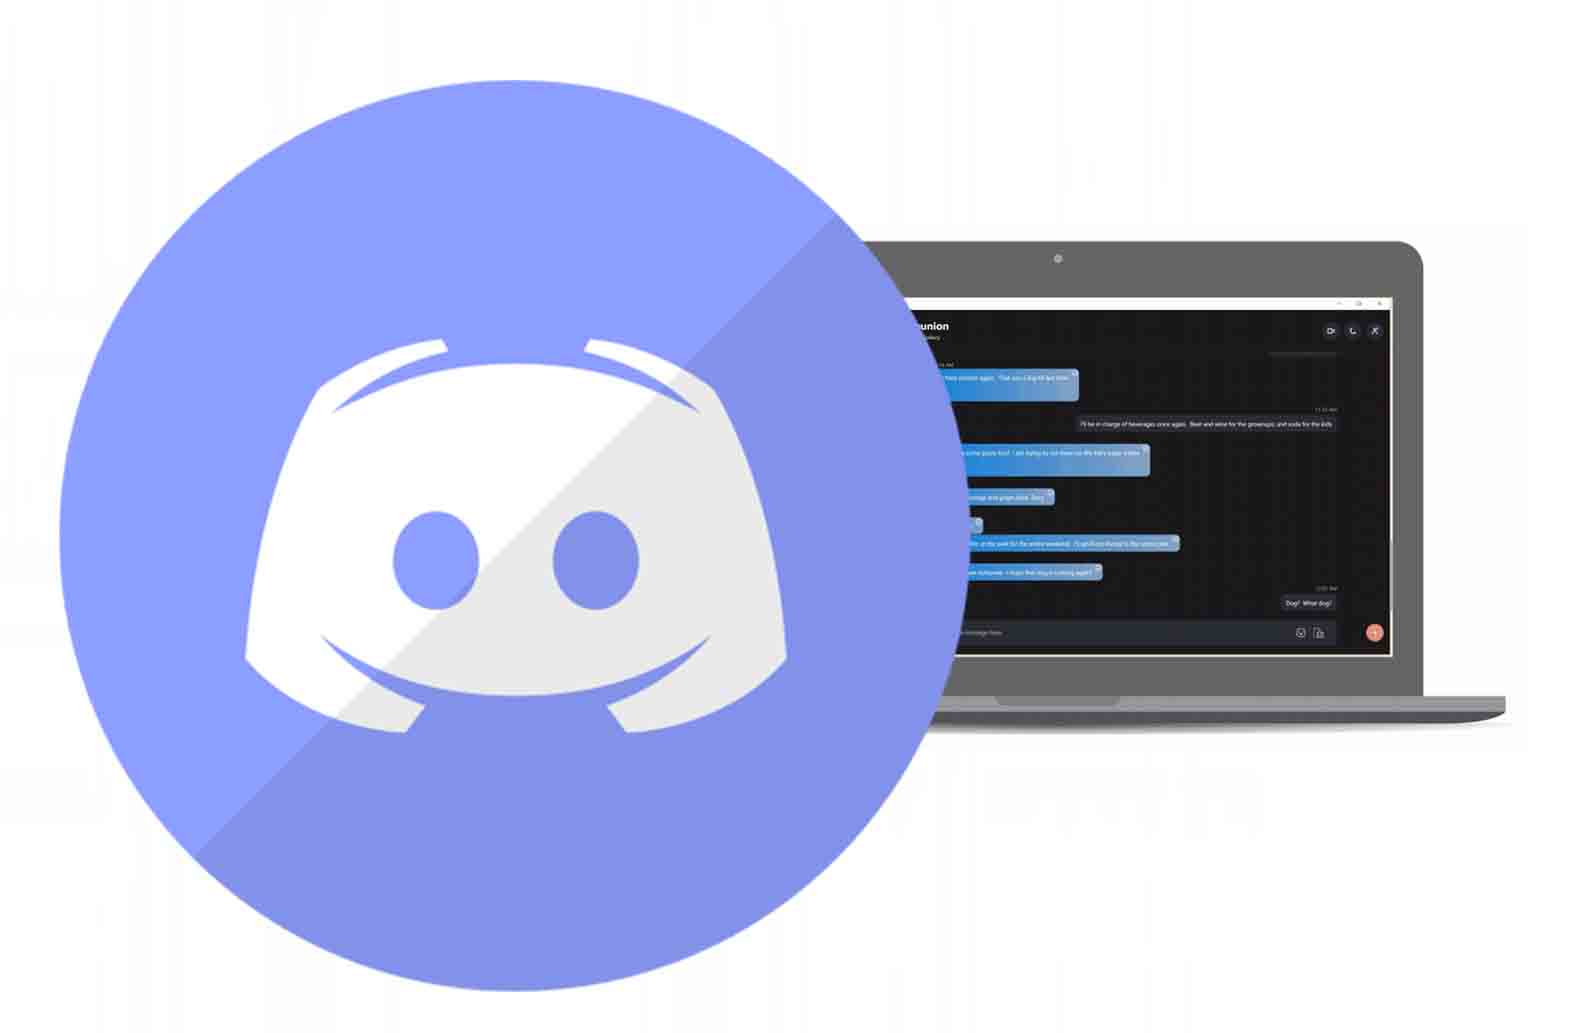 discord on browser